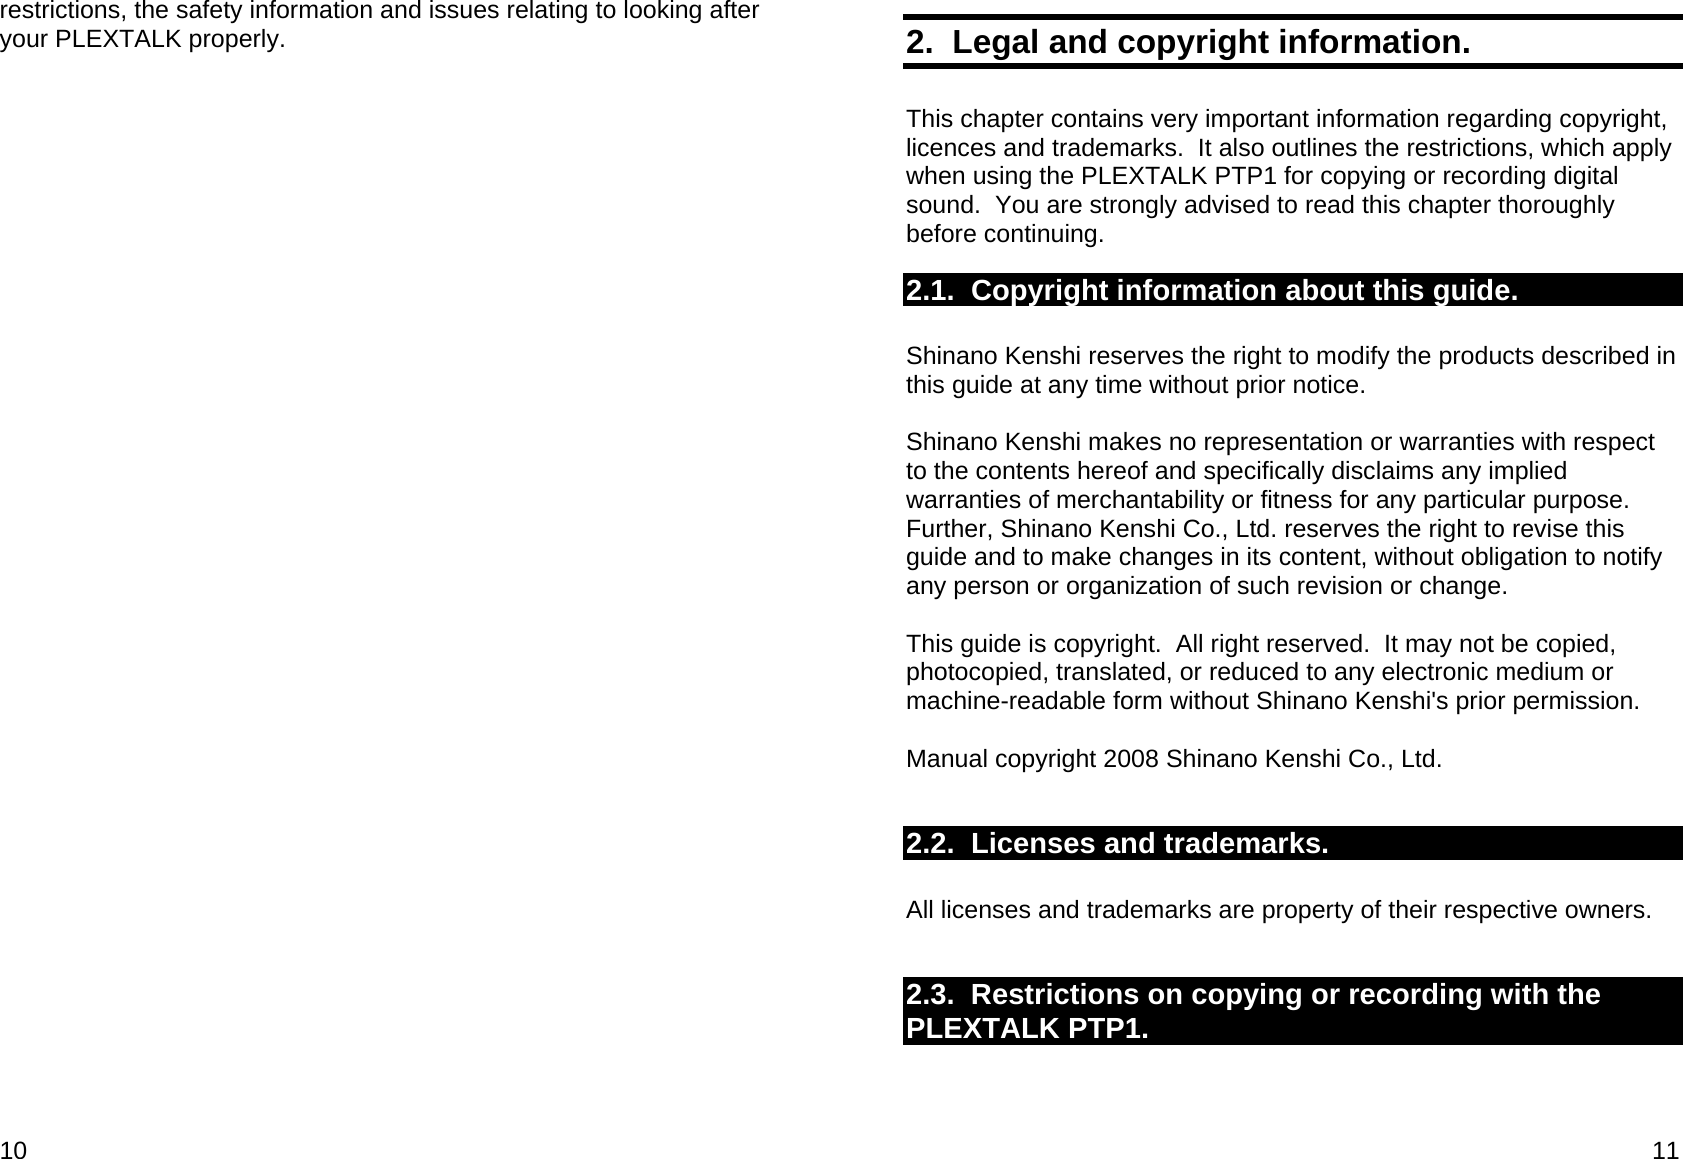 10 restrictions, the safety information and issues relating to looking after your PLEXTALK properly.  11 2.  Legal and copyright information.  This chapter contains very important information regarding copyright, licences and trademarks.  It also outlines the restrictions, which apply when using the PLEXTALK PTP1 for copying or recording digital sound.  You are strongly advised to read this chapter thoroughly before continuing. 2.1.  Copyright information about this guide.  Shinano Kenshi reserves the right to modify the products described in this guide at any time without prior notice.  Shinano Kenshi makes no representation or warranties with respect to the contents hereof and specifically disclaims any implied warranties of merchantability or fitness for any particular purpose.  Further, Shinano Kenshi Co., Ltd. reserves the right to revise this guide and to make changes in its content, without obligation to notify any person or organization of such revision or change.  This guide is copyright.  All right reserved.  It may not be copied, photocopied, translated, or reduced to any electronic medium or machine-readable form without Shinano Kenshi&apos;s prior permission.  Manual copyright 2008 Shinano Kenshi Co., Ltd.   2.2.  Licenses and trademarks.  All licenses and trademarks are property of their respective owners.  2.3.  Restrictions on copying or recording with the PLEXTALK PTP1.  